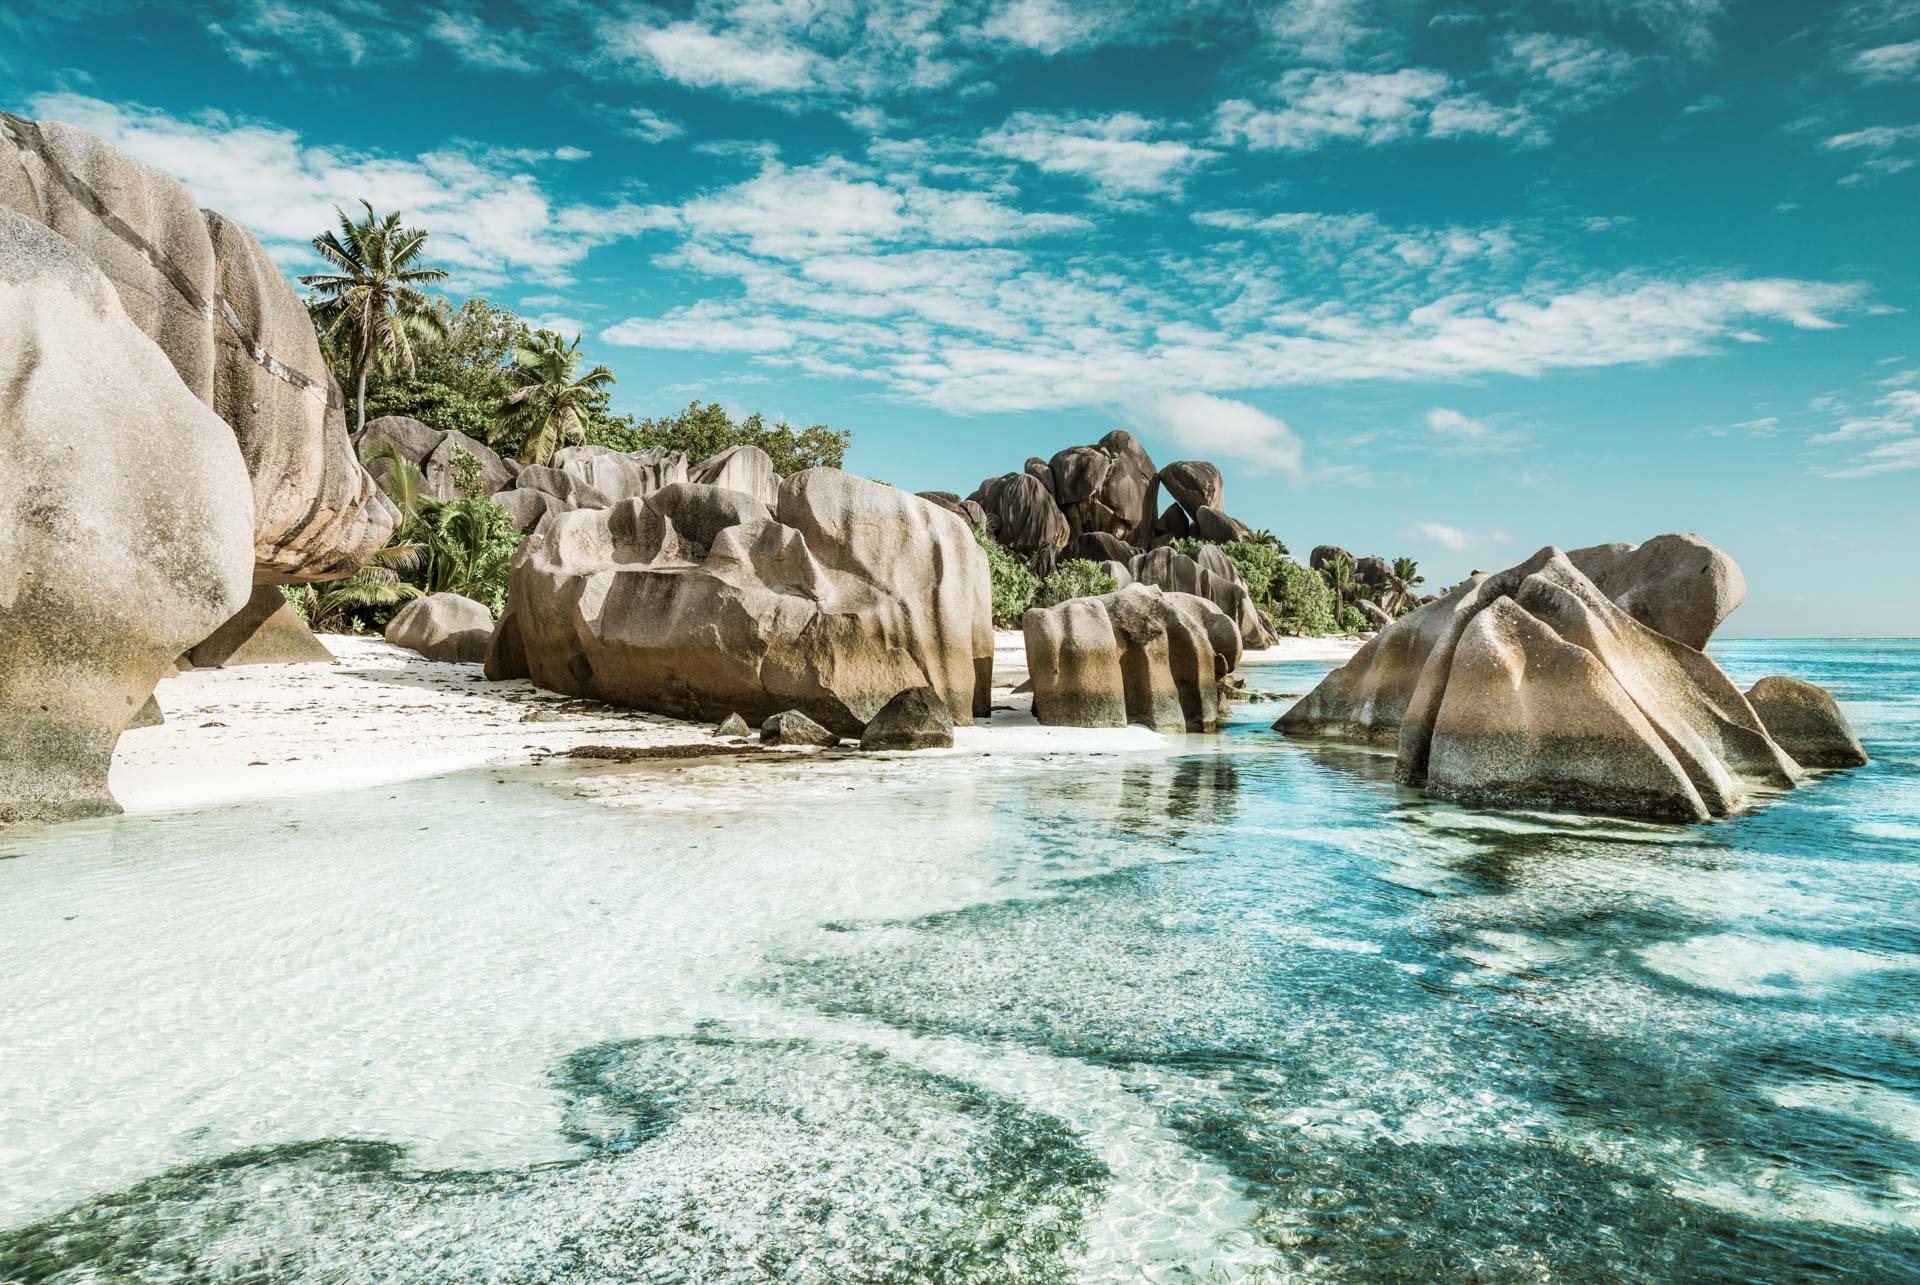 Anse Sous d'Argent beach with granite boulders and turquoise sea in Seychelles